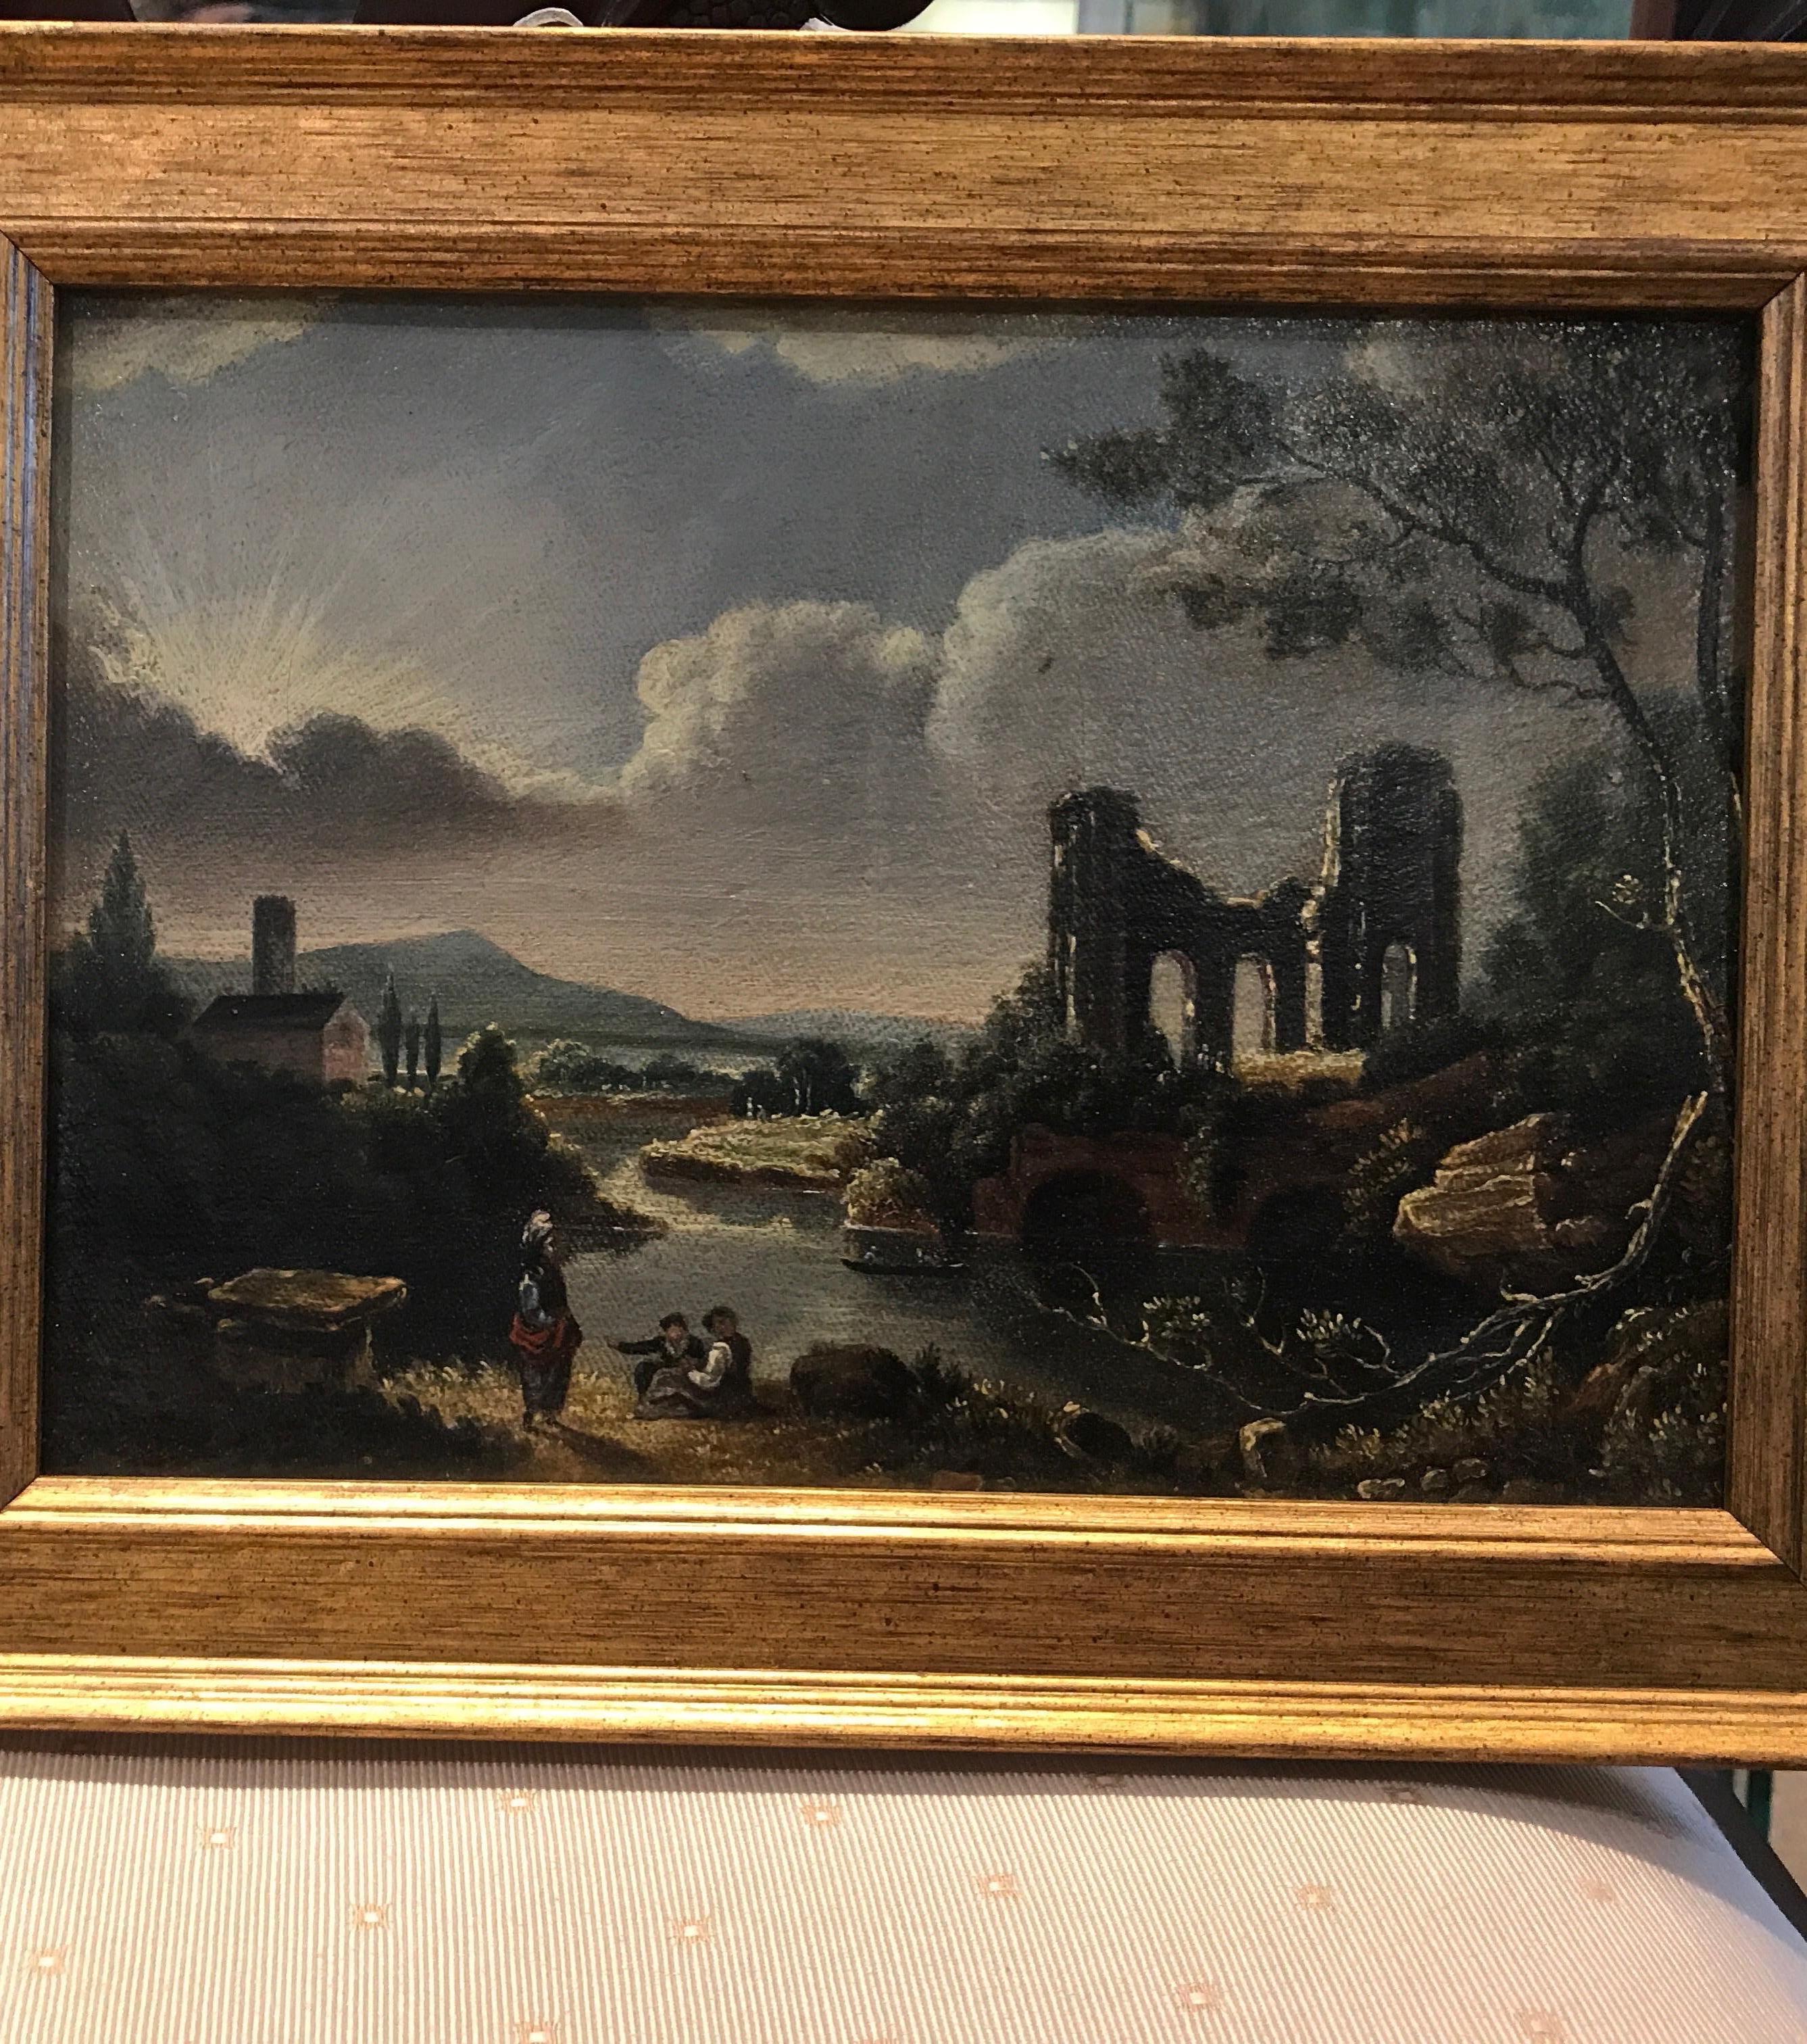 English oil on canvases of a village scene with ruins and river. The painting has been re-scratched and a recent gilt wood frame. England, circa 1850, 11 inches wide, 8.5 inches tall framed, Unframed 8.75 by 6.5.